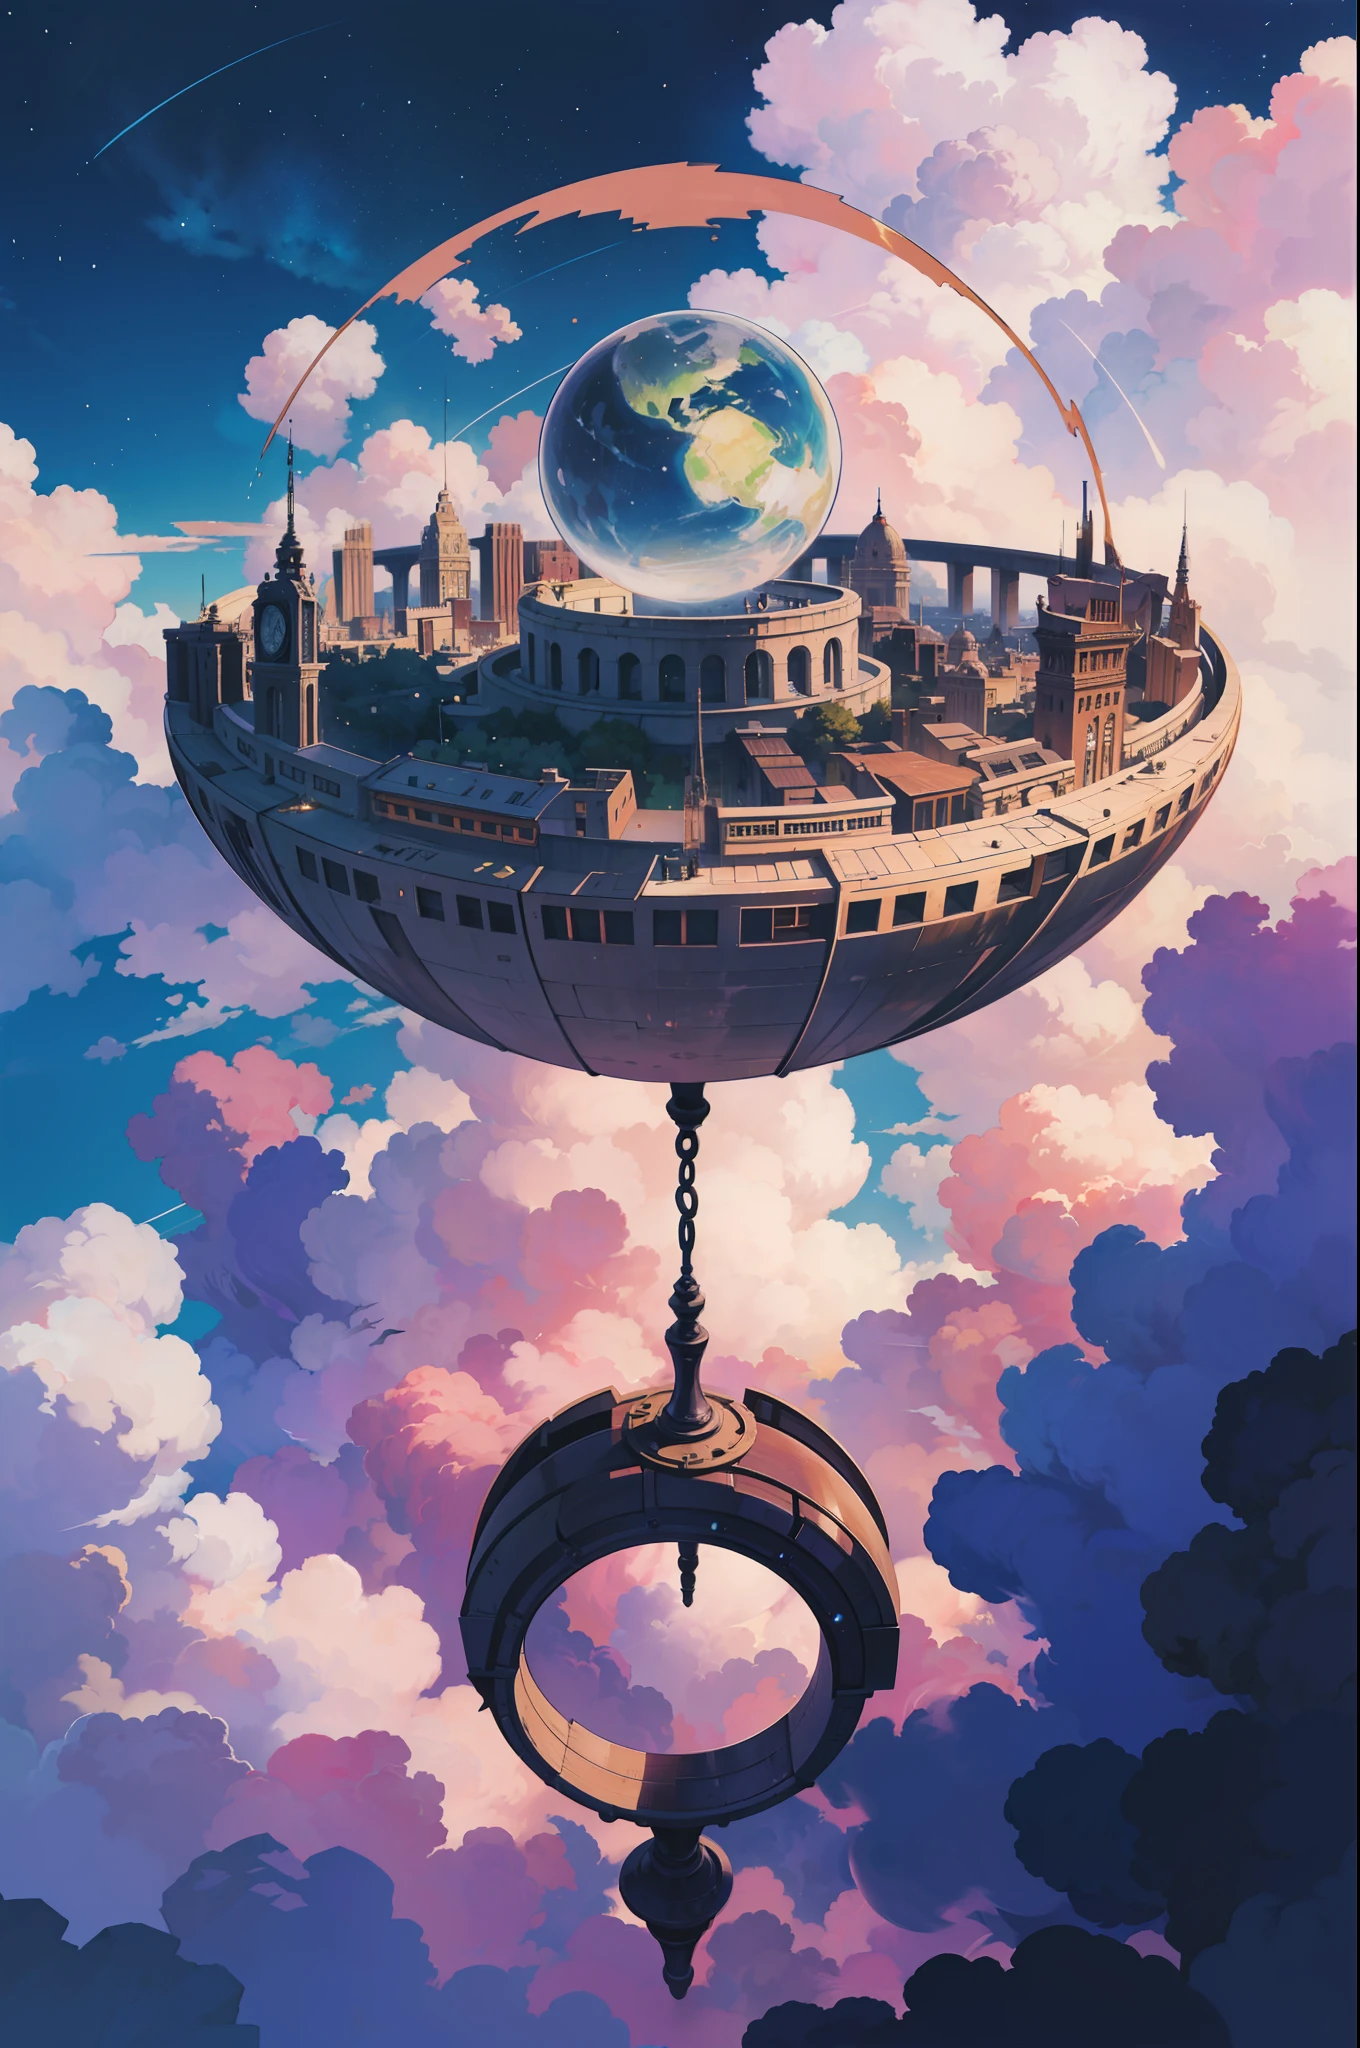 （levitating：1.5），（A huge double-ring steampunk city floating in space：1.3），（Illuminated futuristic steampunk city：1.4），（Thick clouds：1.4），（Estilo de Makoto Shinkai：1.4），Rejoice，Perfect quality，Clear focus（Clutter - home：0.8）， （tmasterpiece：1.2）， （realisticlying：1.2） ，（with light glowing：1.2）， （best qualtiy）， （detailed  starry sky：1.3） ，（complexdetails）， （8K）， （Detail meteor） ，（Sharp focus），（having fun），（Award-winning digital artwork：1.3） af （sketching：1.3），（with dynamism：1.3）,studiolight,Theme，looking from above, the space, afloat， --v 6